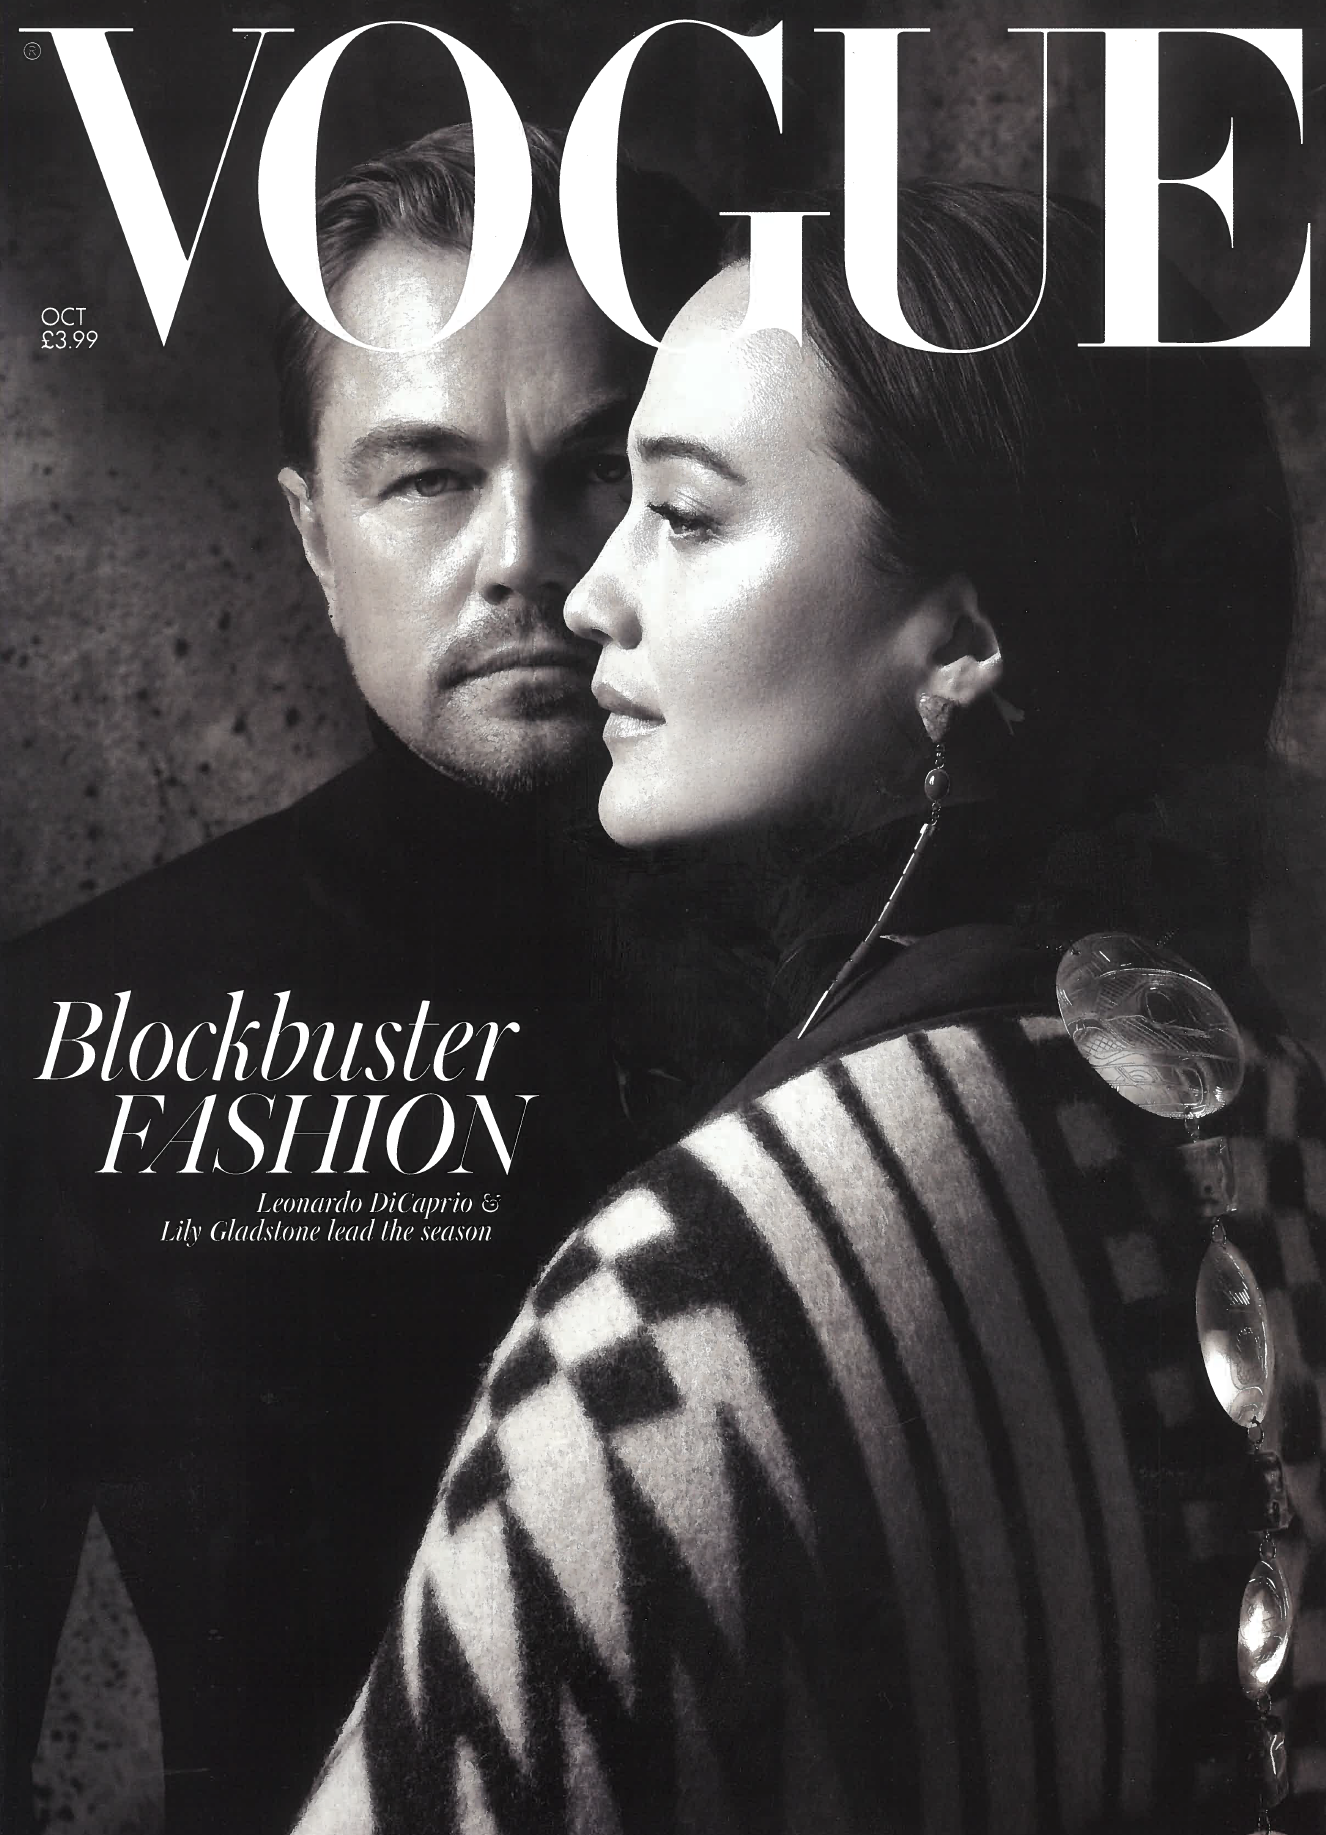 cover of British vogue magazine with Leonardo DiCaprio and actress in black and white photo image